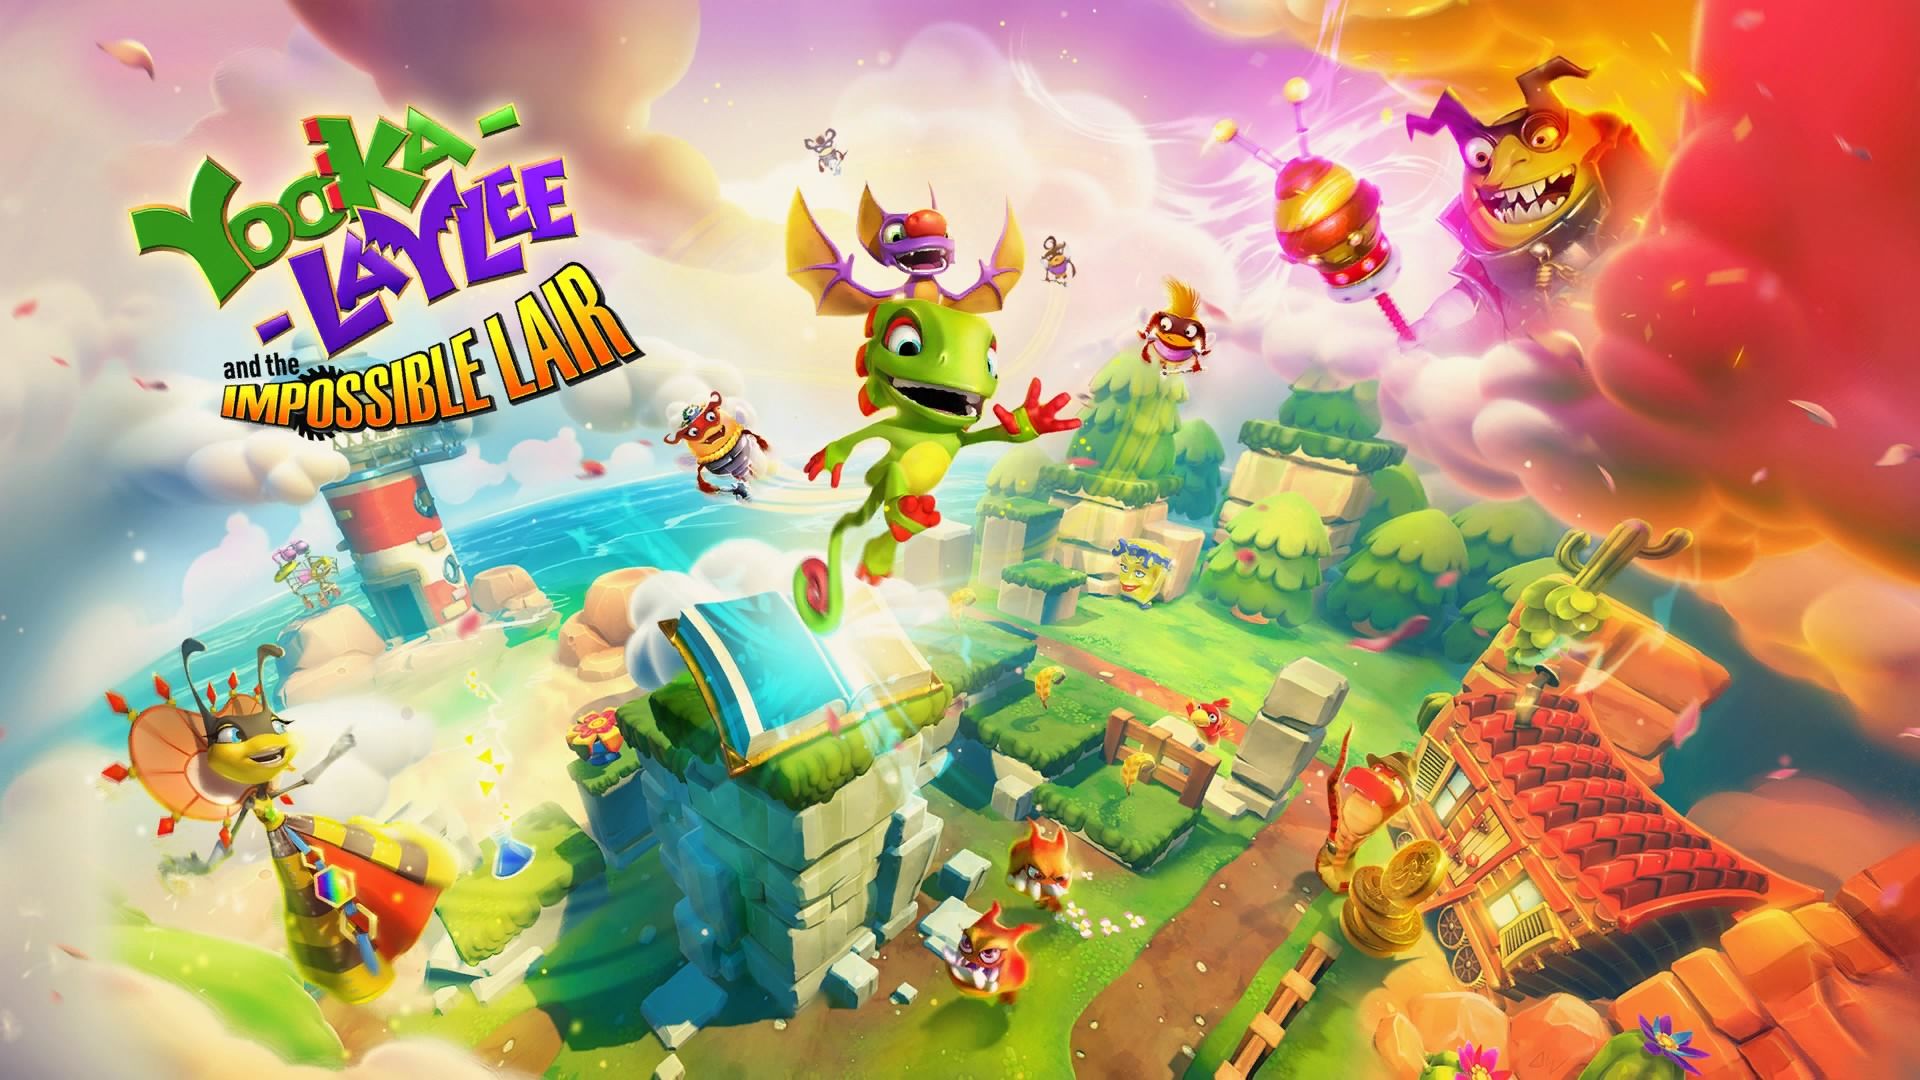 how can i play yooka laylee for a ps3 controller on osx